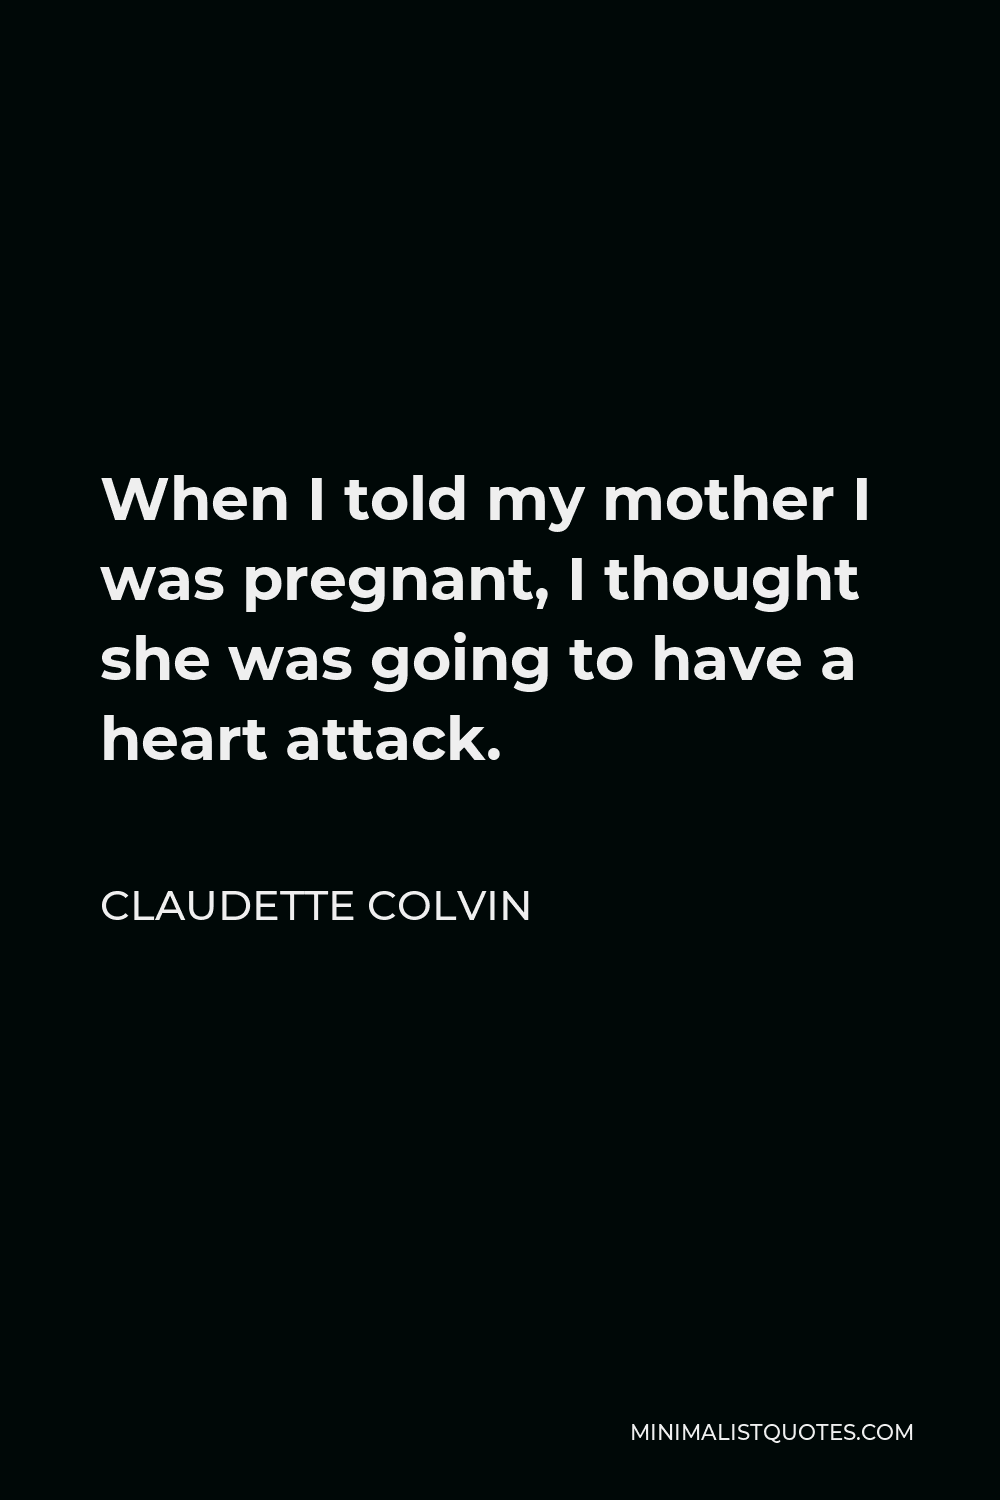 Claudette Colvin Quote - When I told my mother I was pregnant, I thought she was going to have a heart attack.